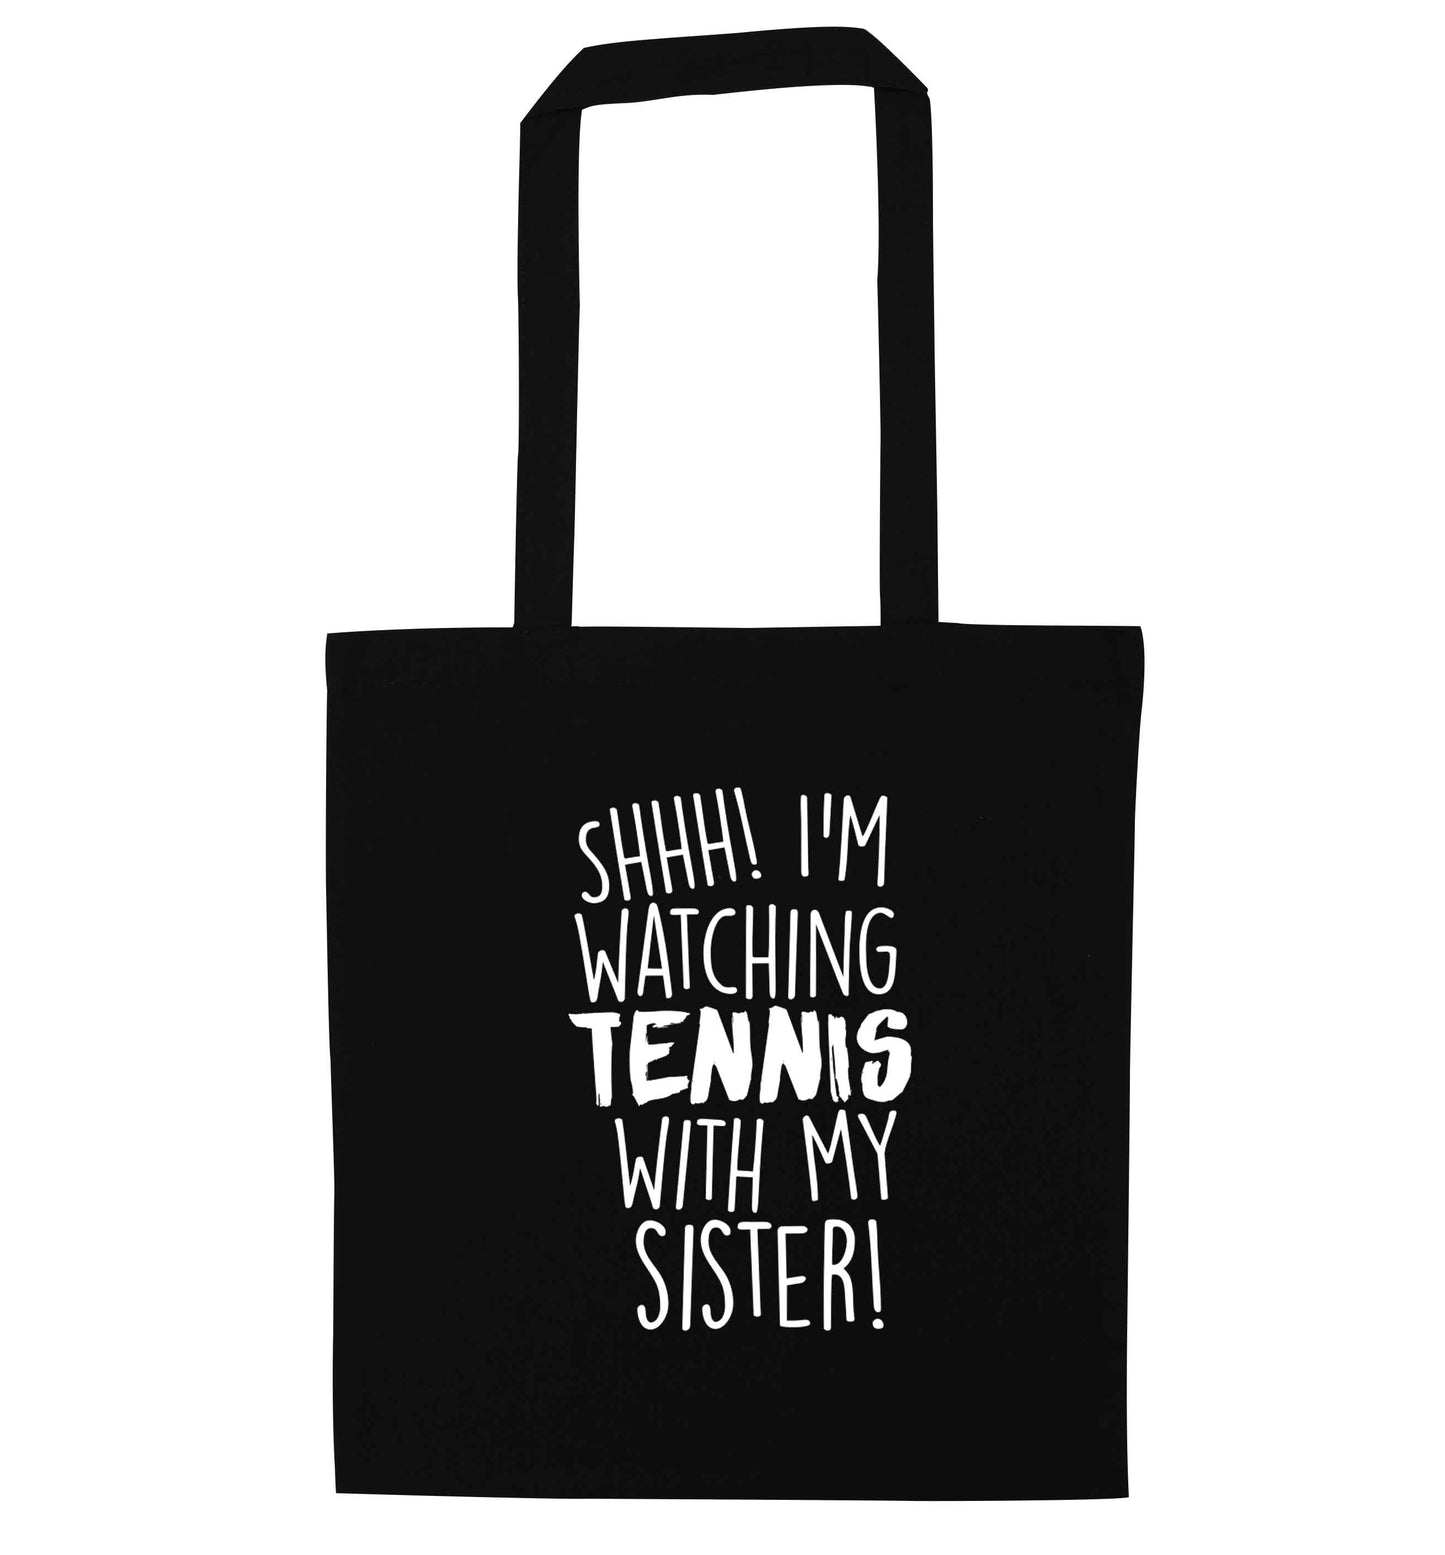 Shh! I'm watching tennis with my sister! black tote bag